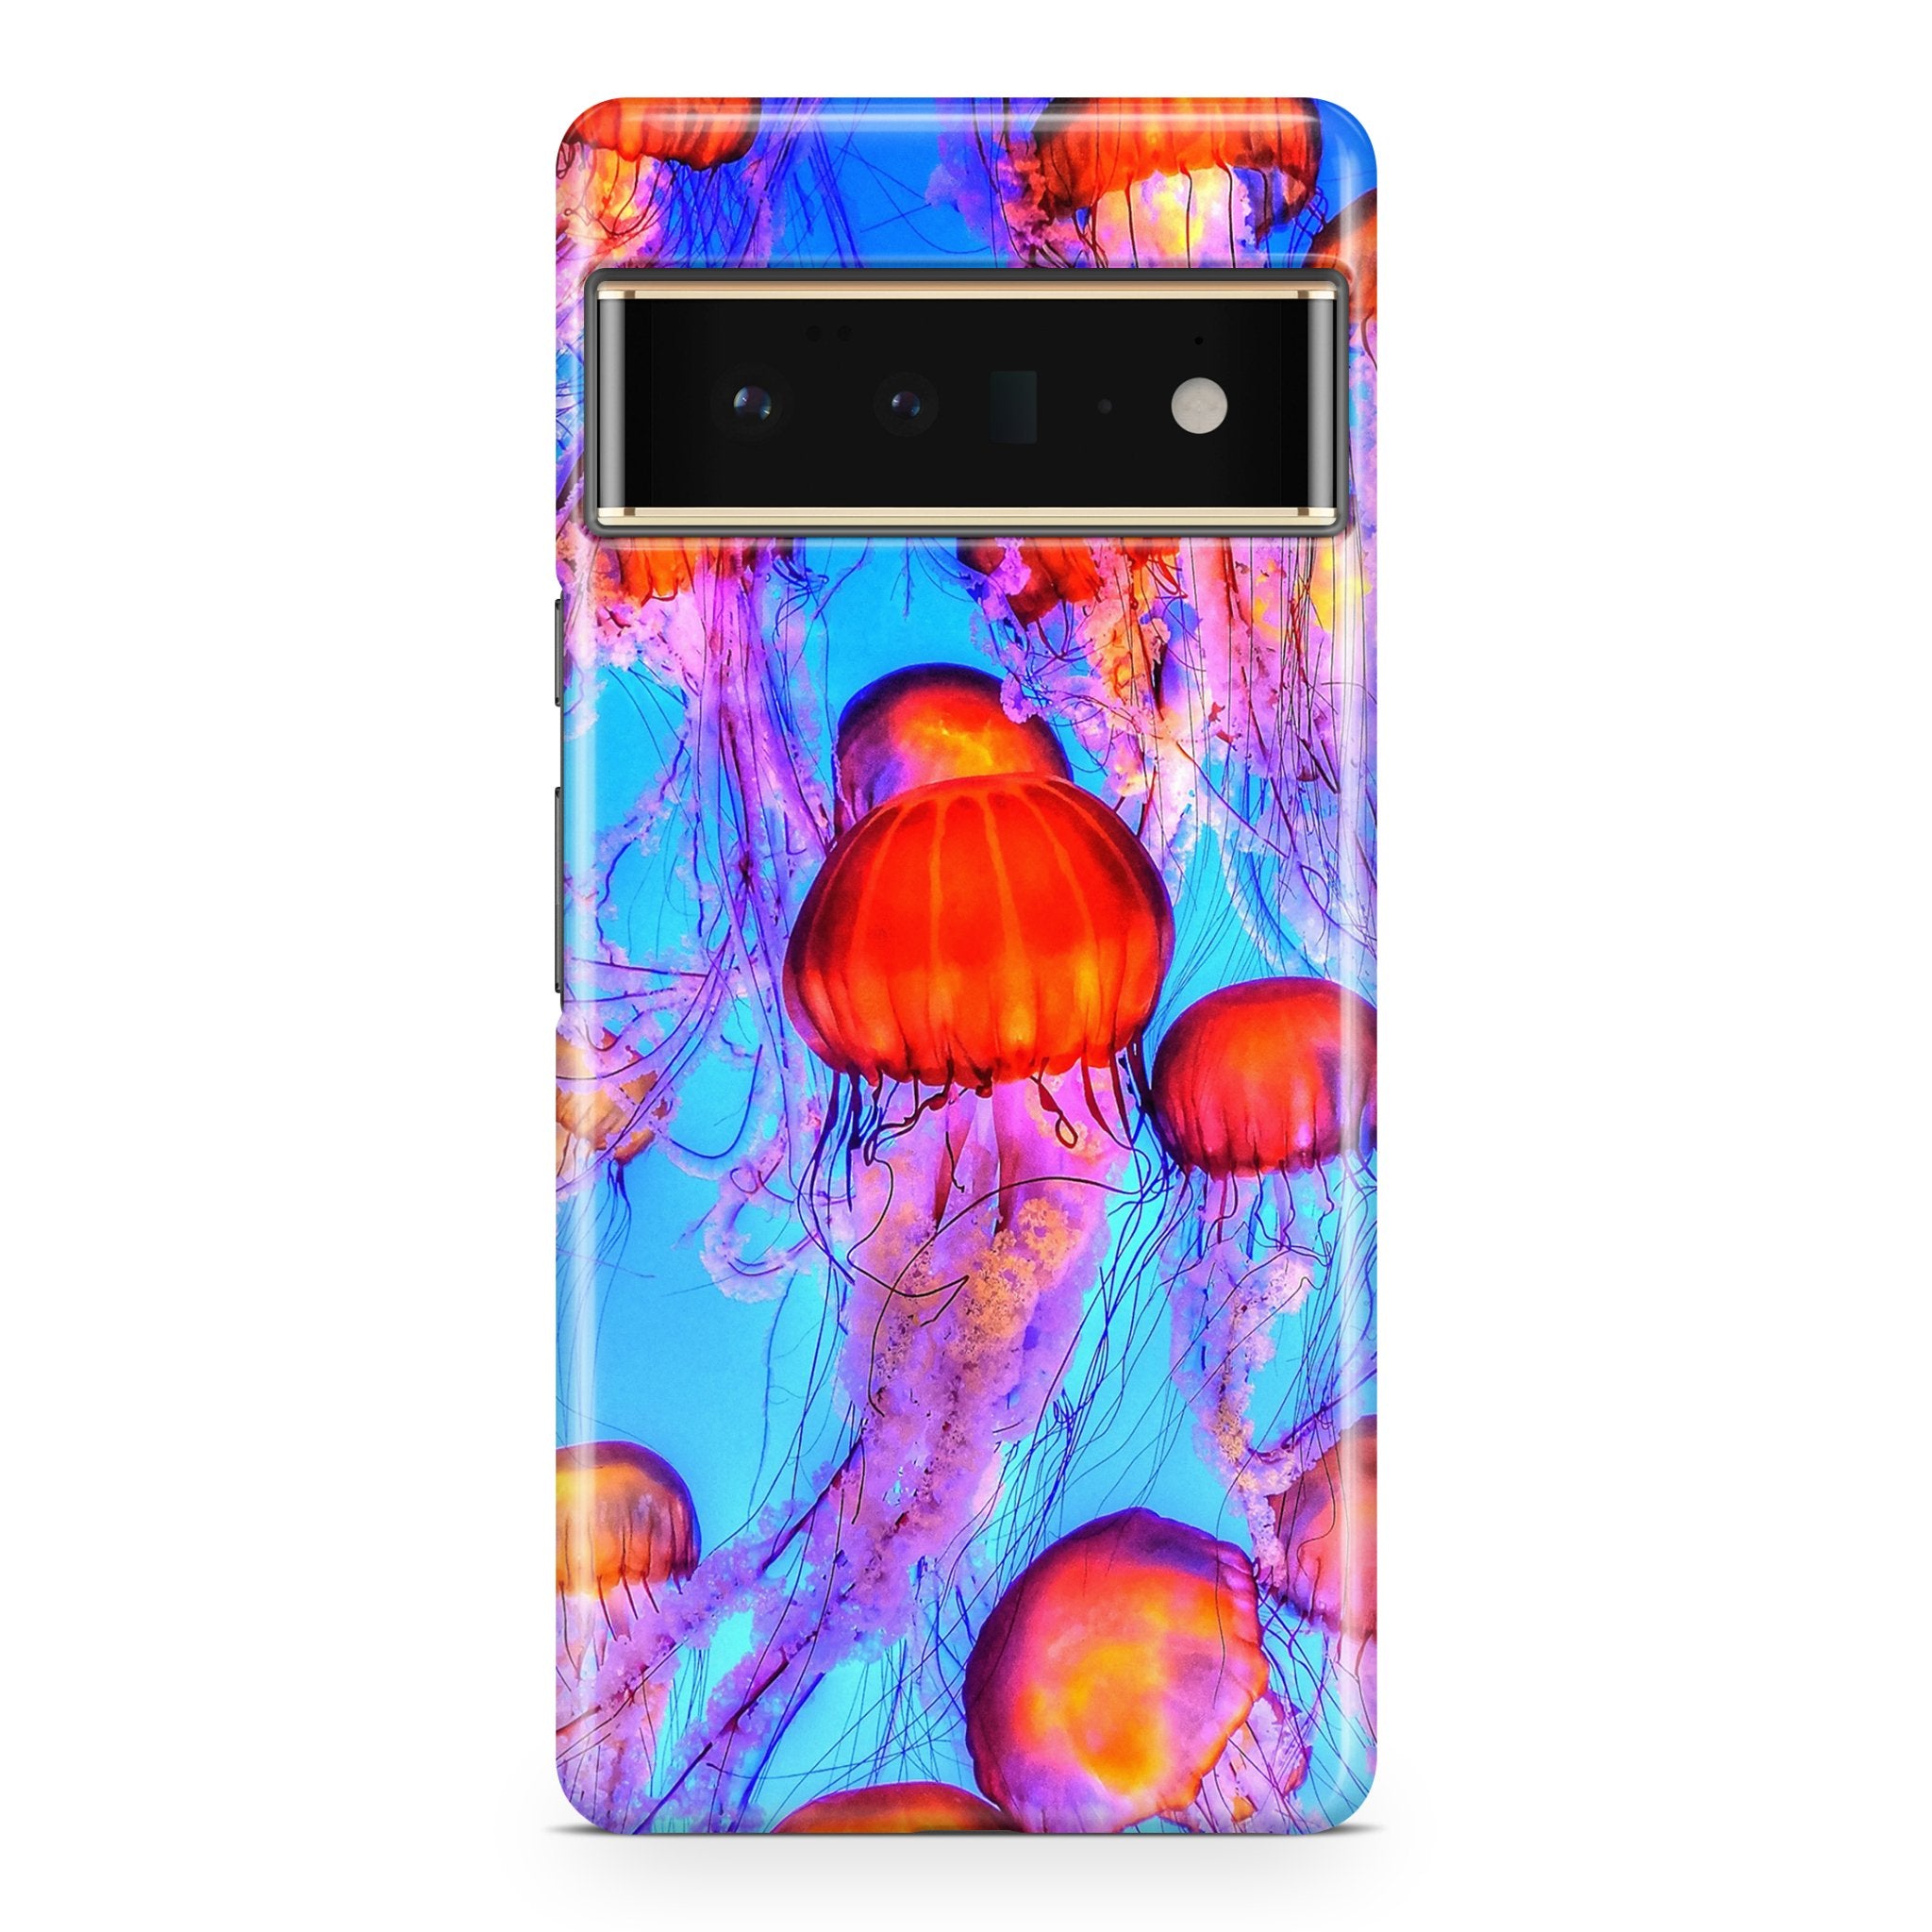 Jellyfish - Google phone case designs by CaseSwagger